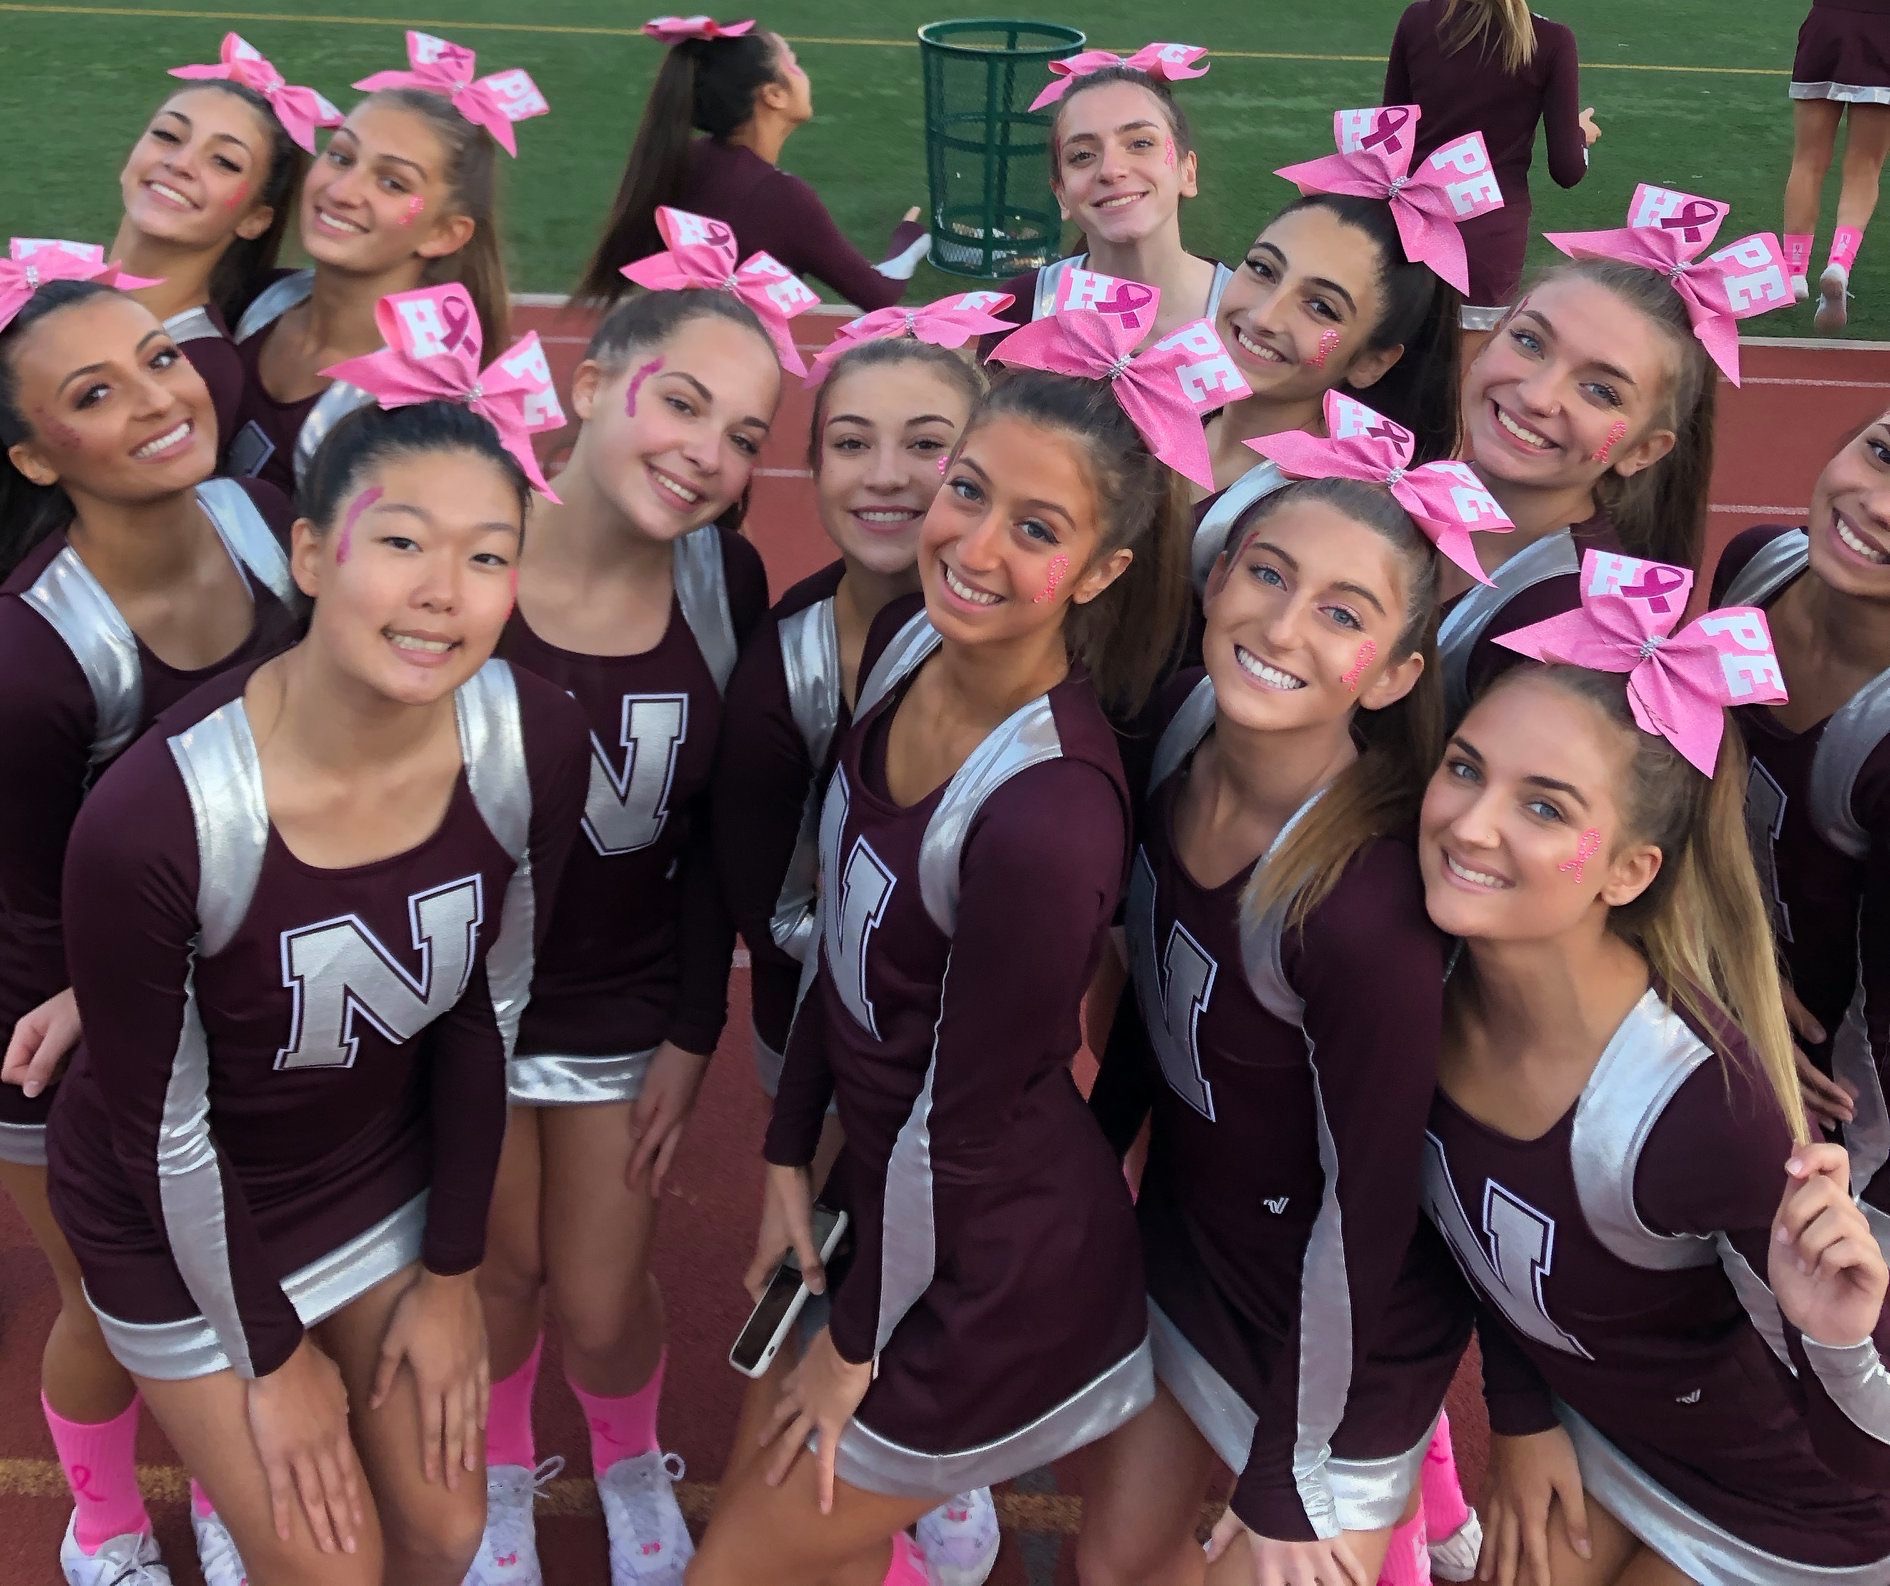 All smiles for Cheer for a Cure!